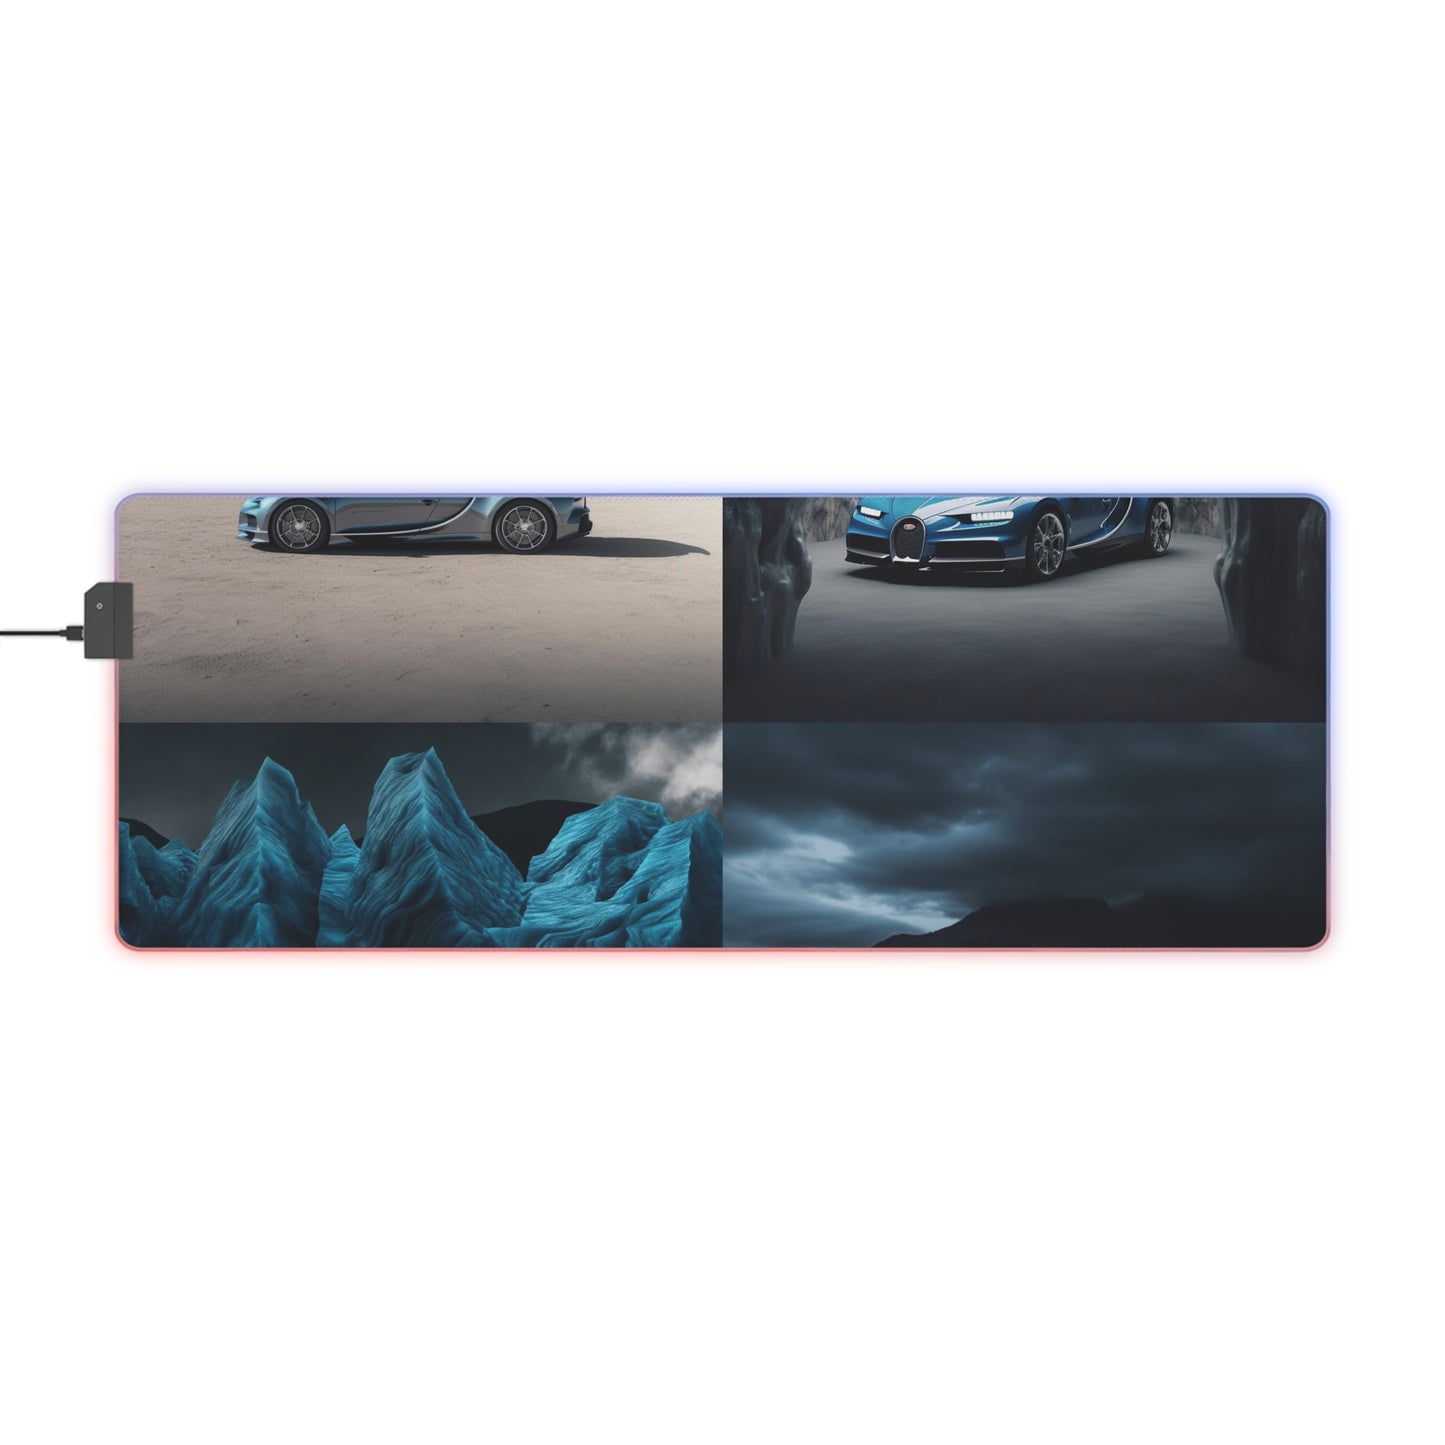 LED Gaming Mouse Pad Bugatti Real Look 5